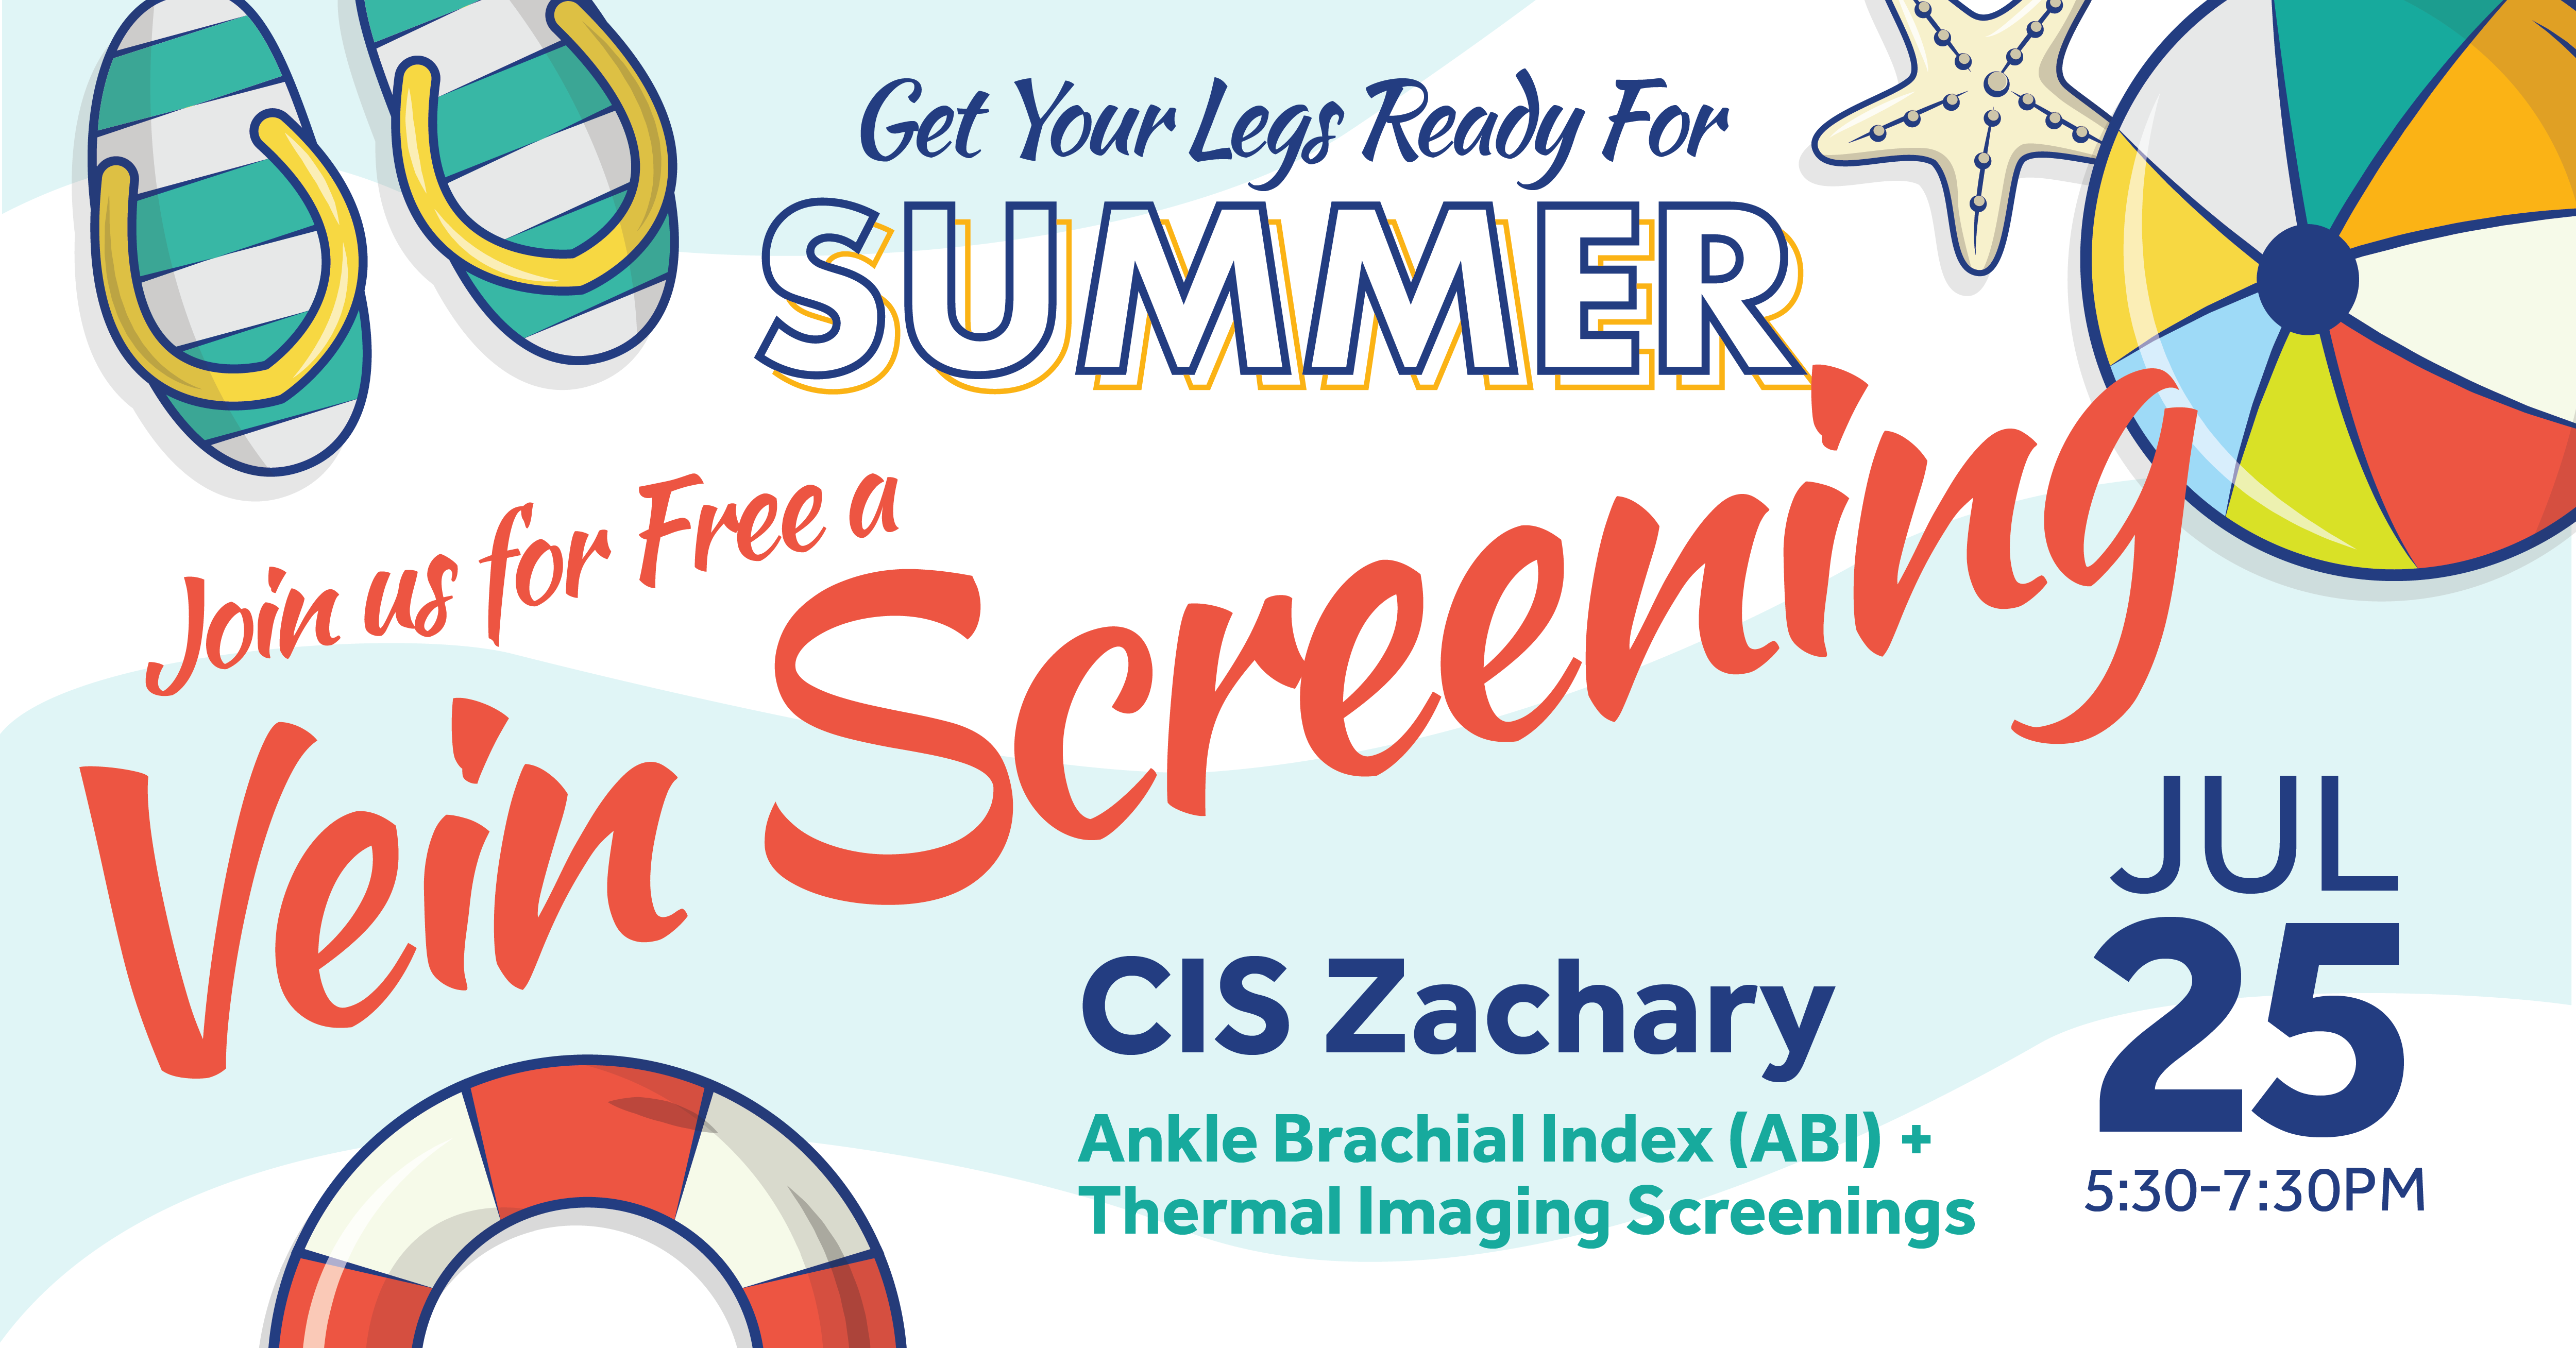 Colorful summer-themed poster promoting a free vein screening event at CIS Zachary. Includes illustrations of flip-flops, a beach ball, and lifesaver rings. Event date is July 25, from 5:30 PM to 7:30 PM. Additional screenings for ABI and thermal imaging are also available.